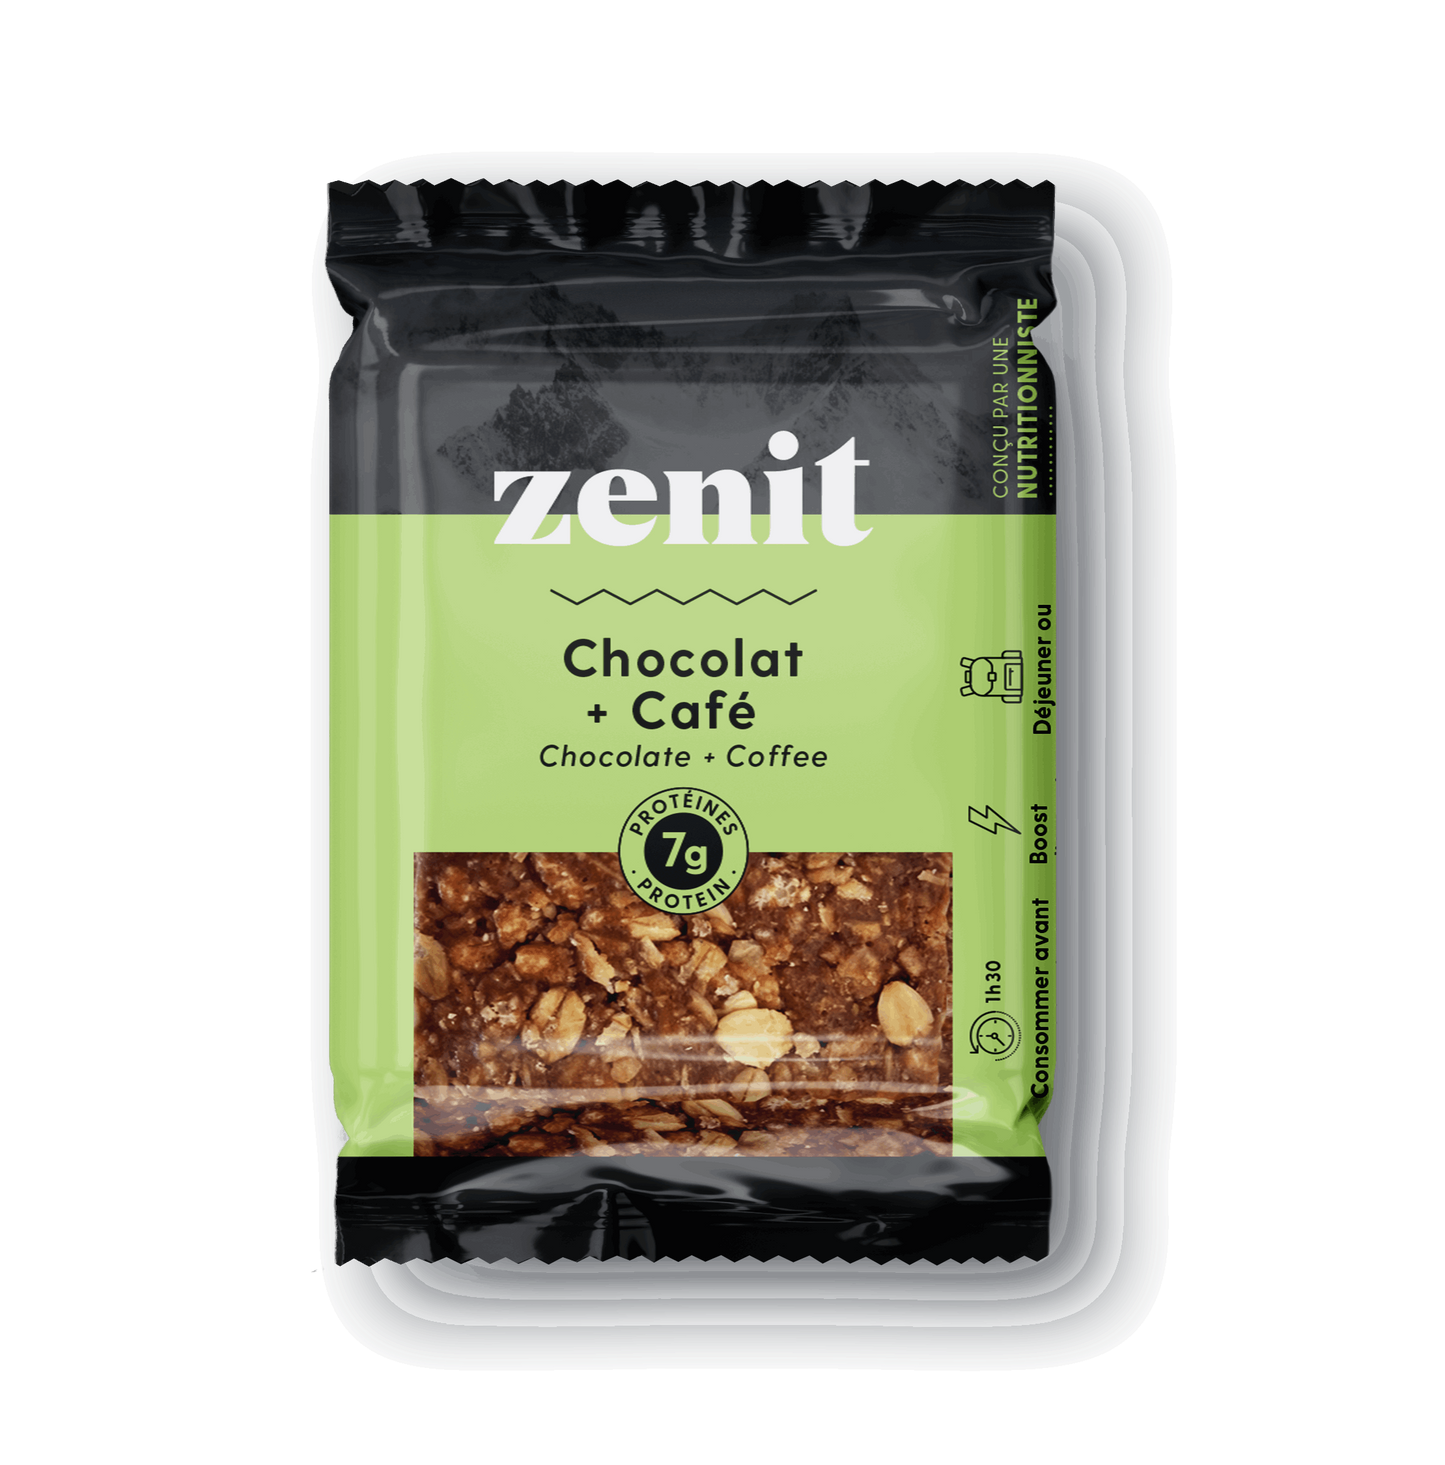 Chocolate and coffee flavored Zenit granola nutrition product